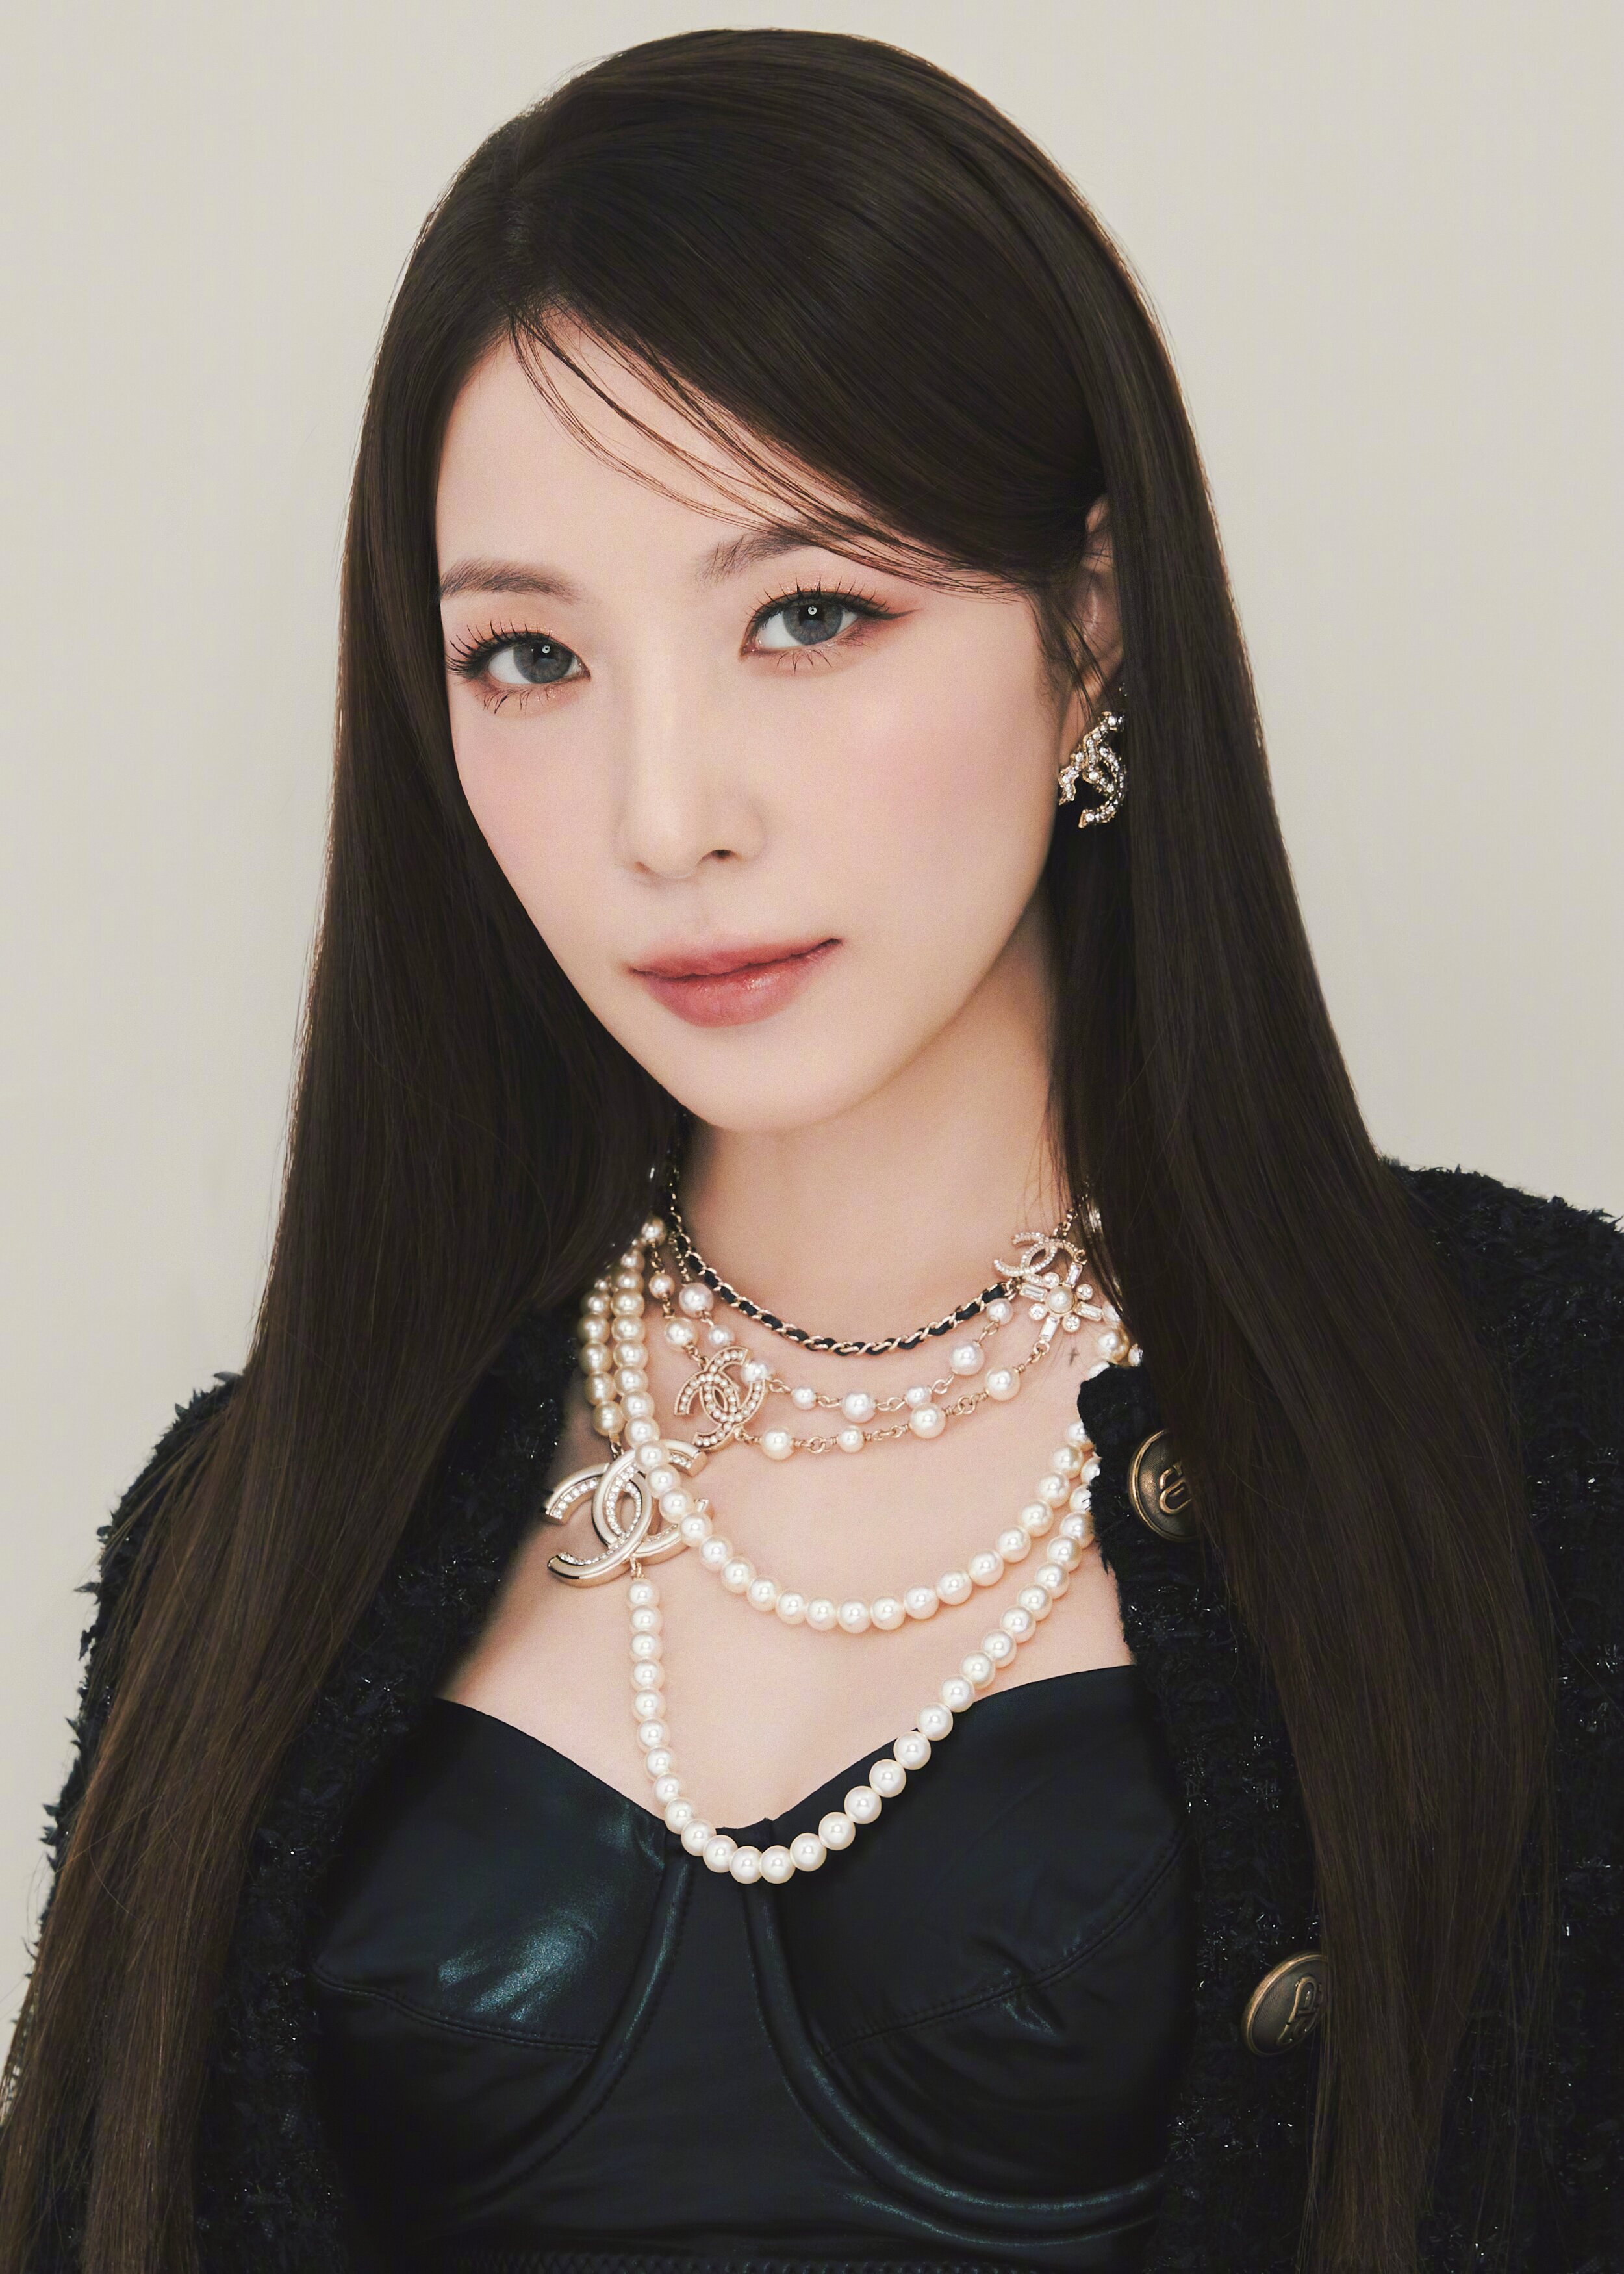 BoA '2022 Winter SMTOWN SMCU PALACE' Concept Teasers kpopping